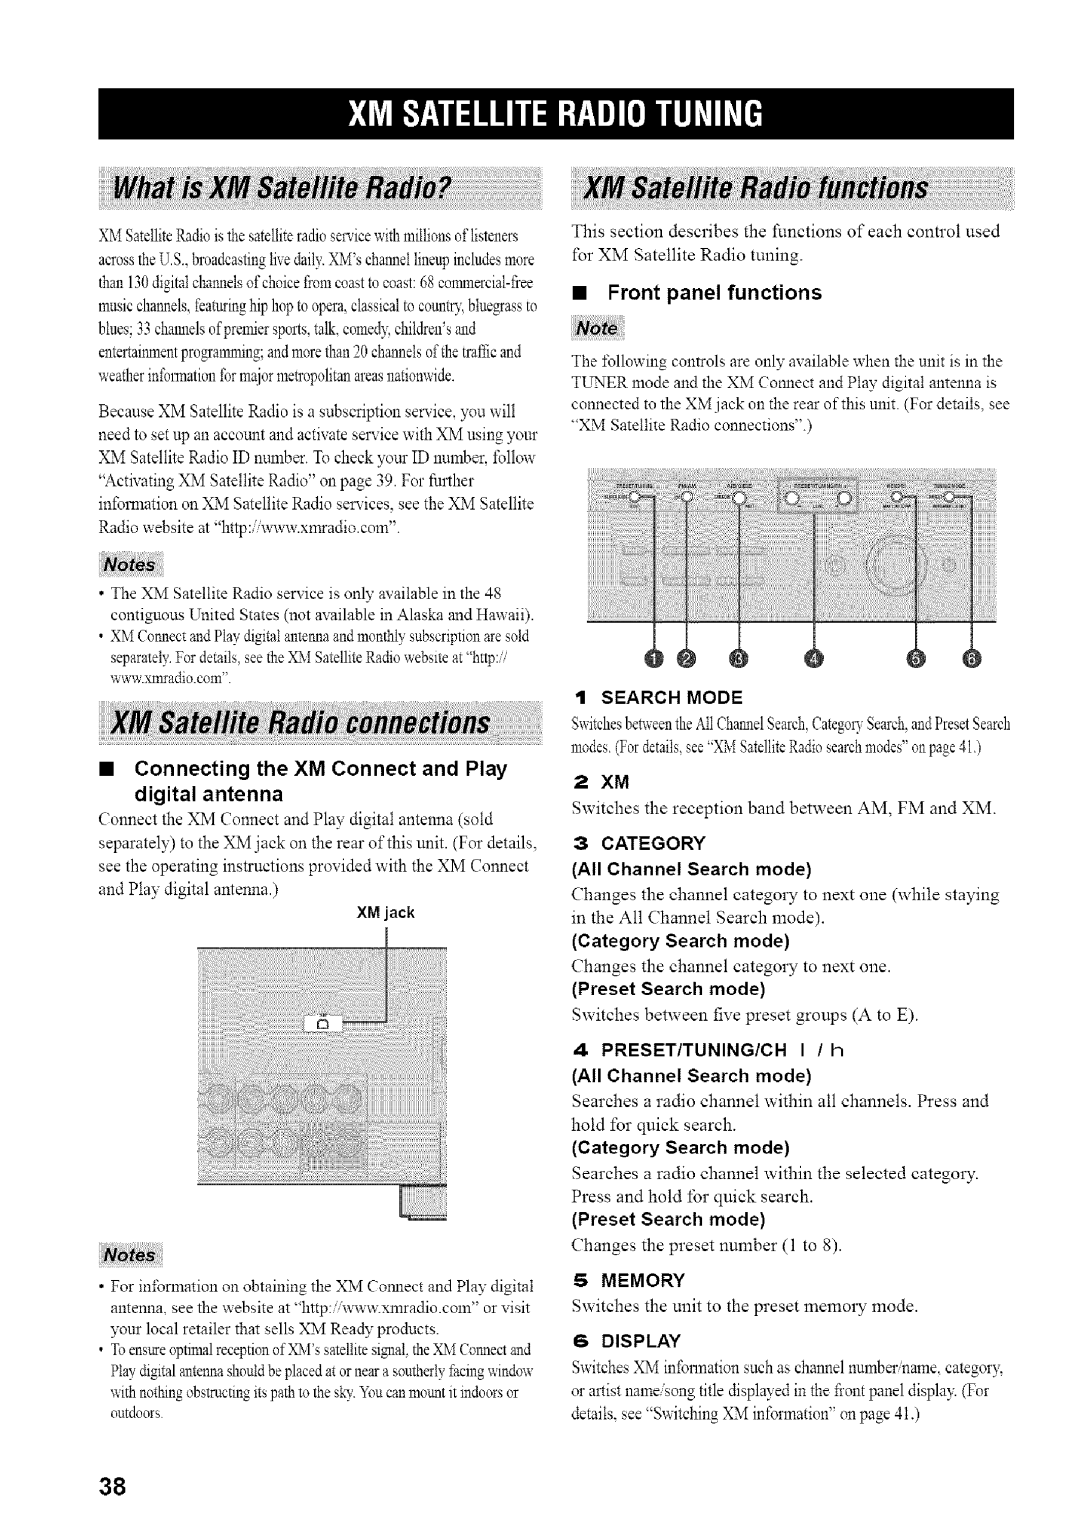 Yamaha HTR-5835 •Connecting the XM Connect and Play, digital antenna, •Front panel functions, Search Mode, Display 